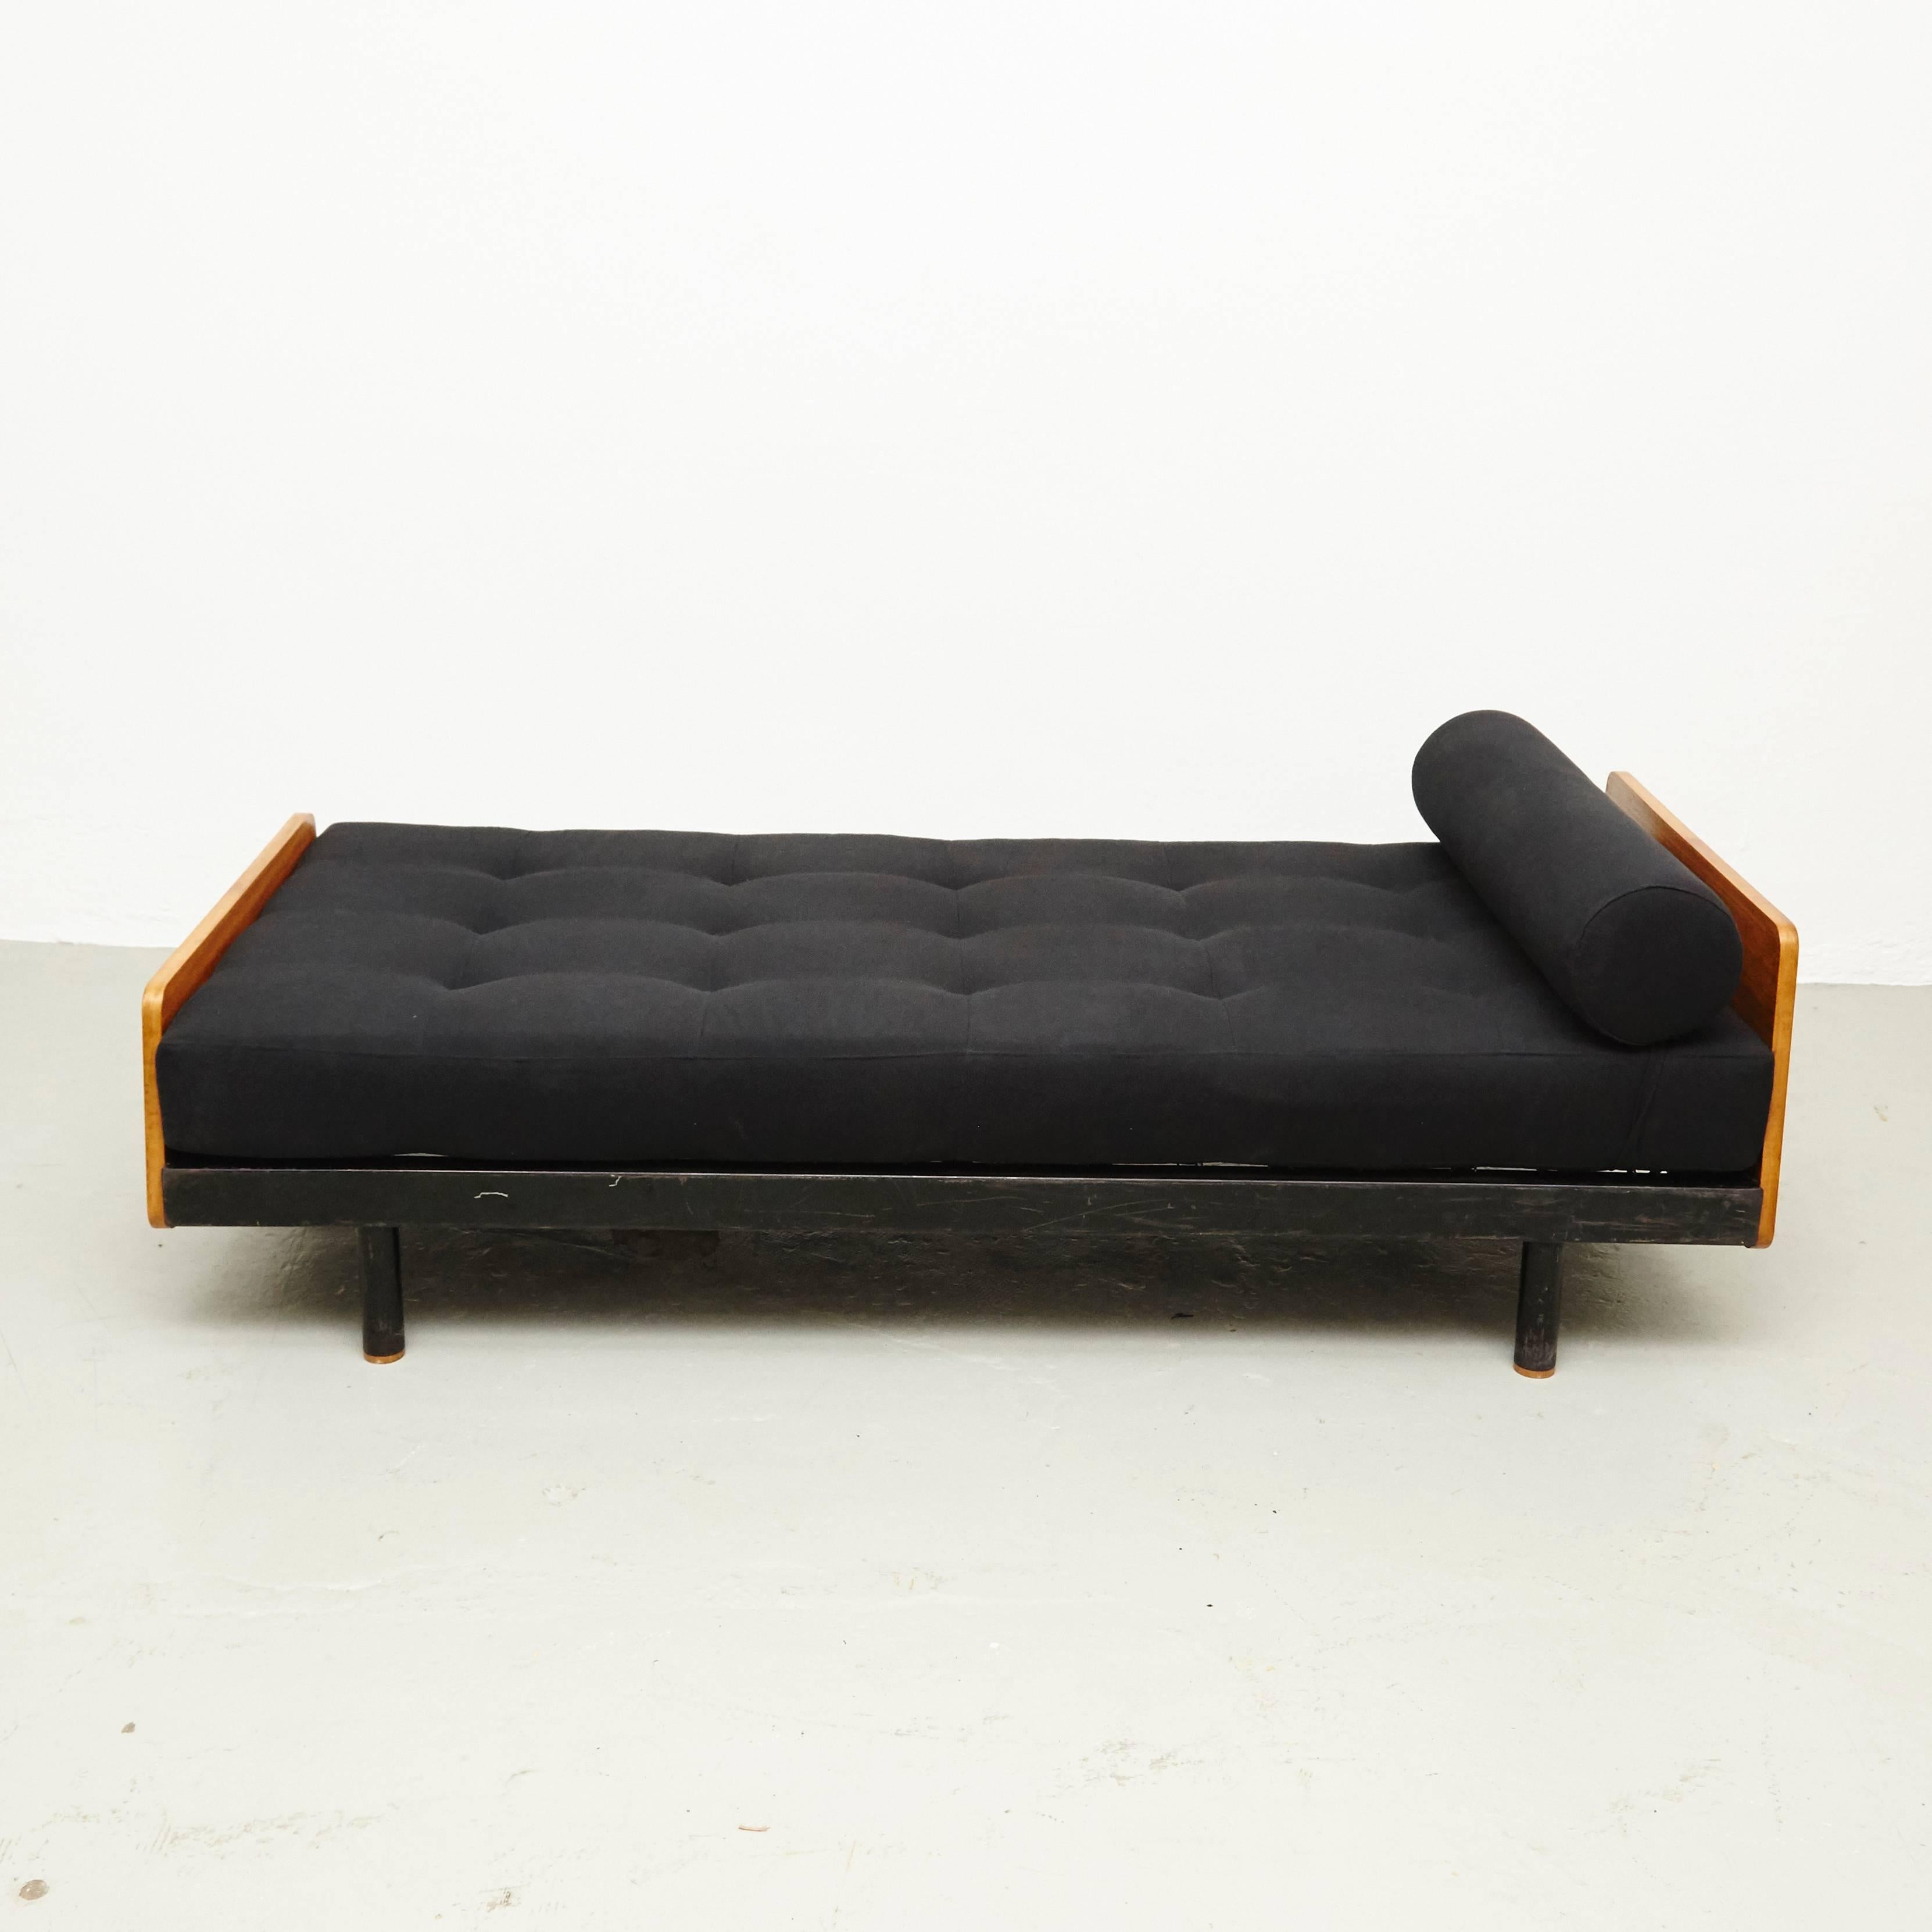 S.C.A.L. daybed designed by Jean Prouve.
Manufactured by Ateliers Prouve, France, circa 1950.
Metal frame, wood, new upholstery.

In good original condition, with minor wear consistent with age and use, preserving a beautiful patina.

Jean